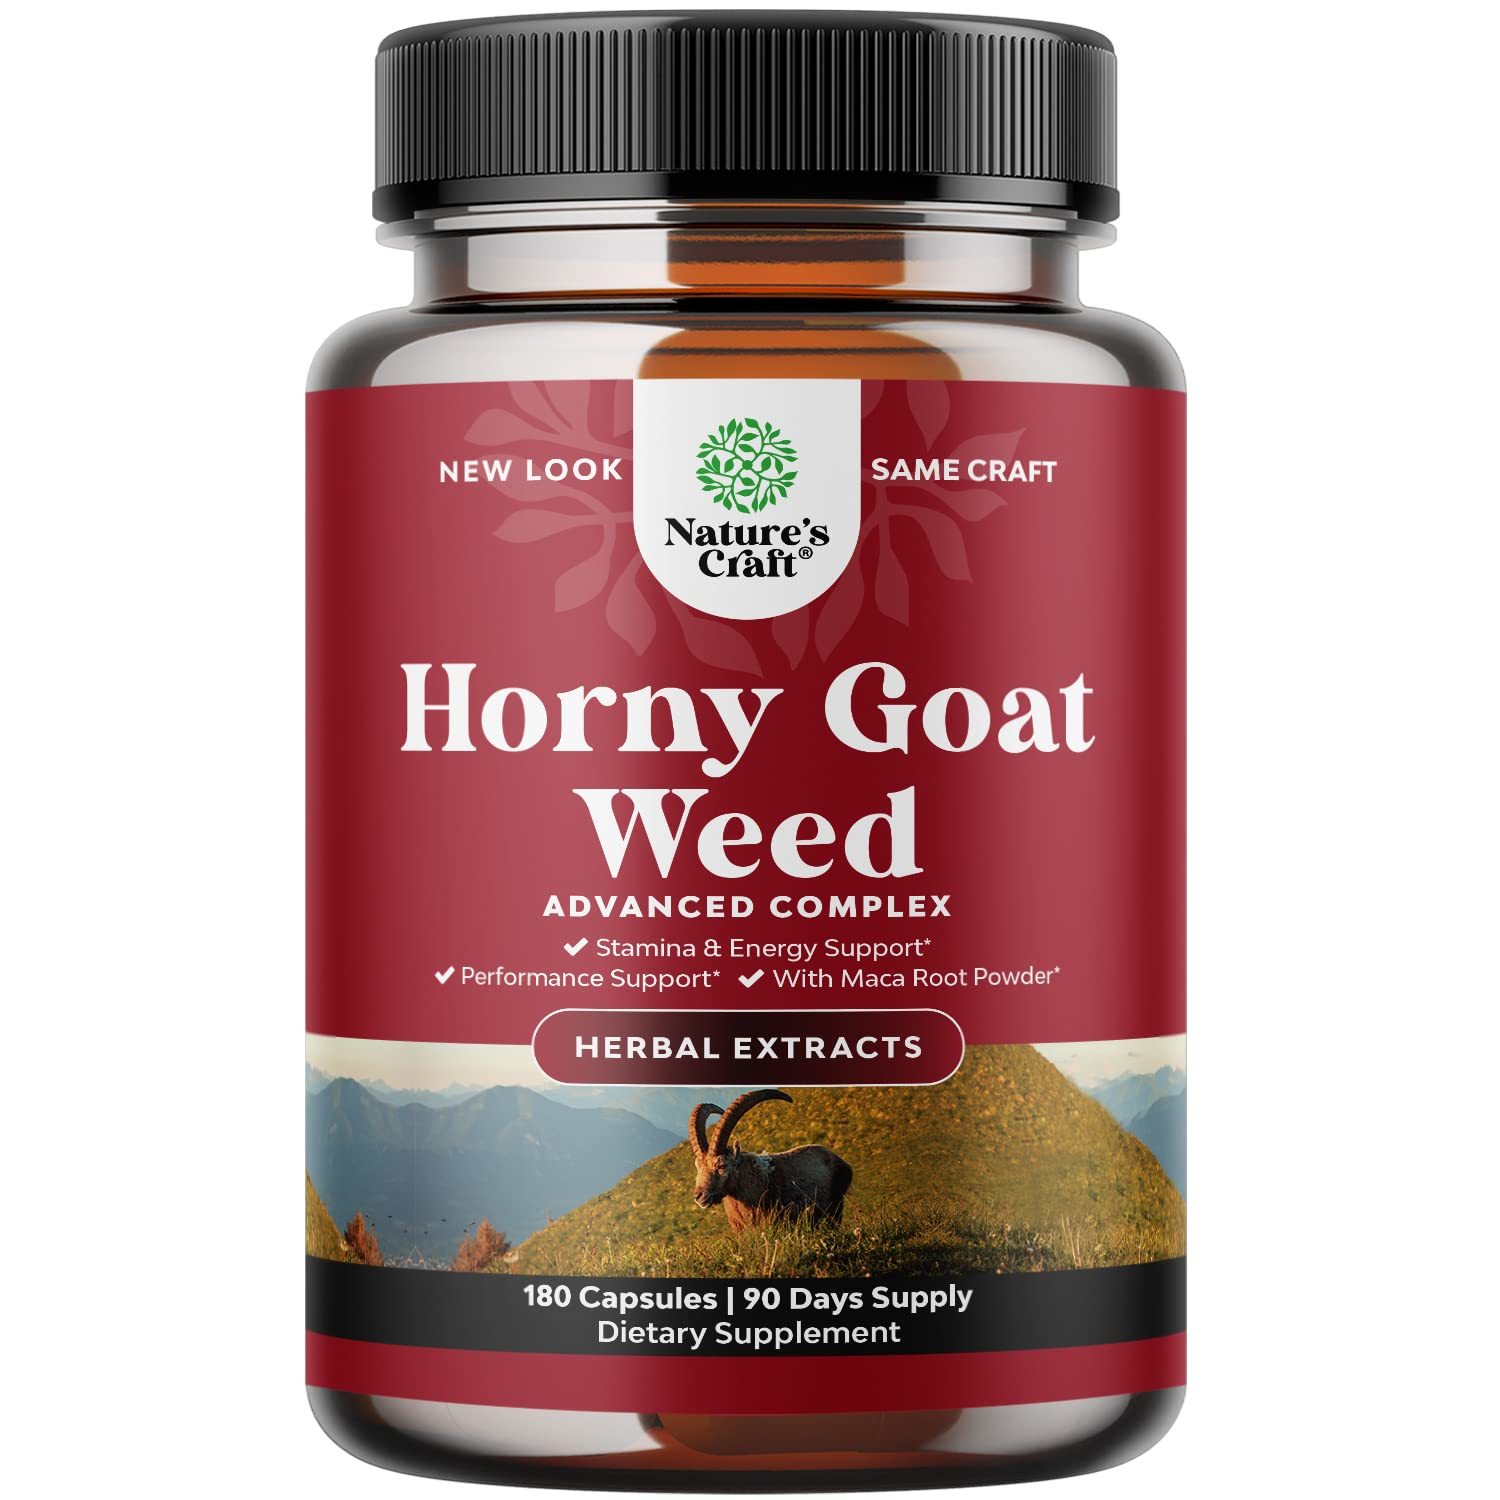 Horny Goat Weed For Male Enhancement - Extra Strength Horny Goat Weed For Men 15 - $45.99